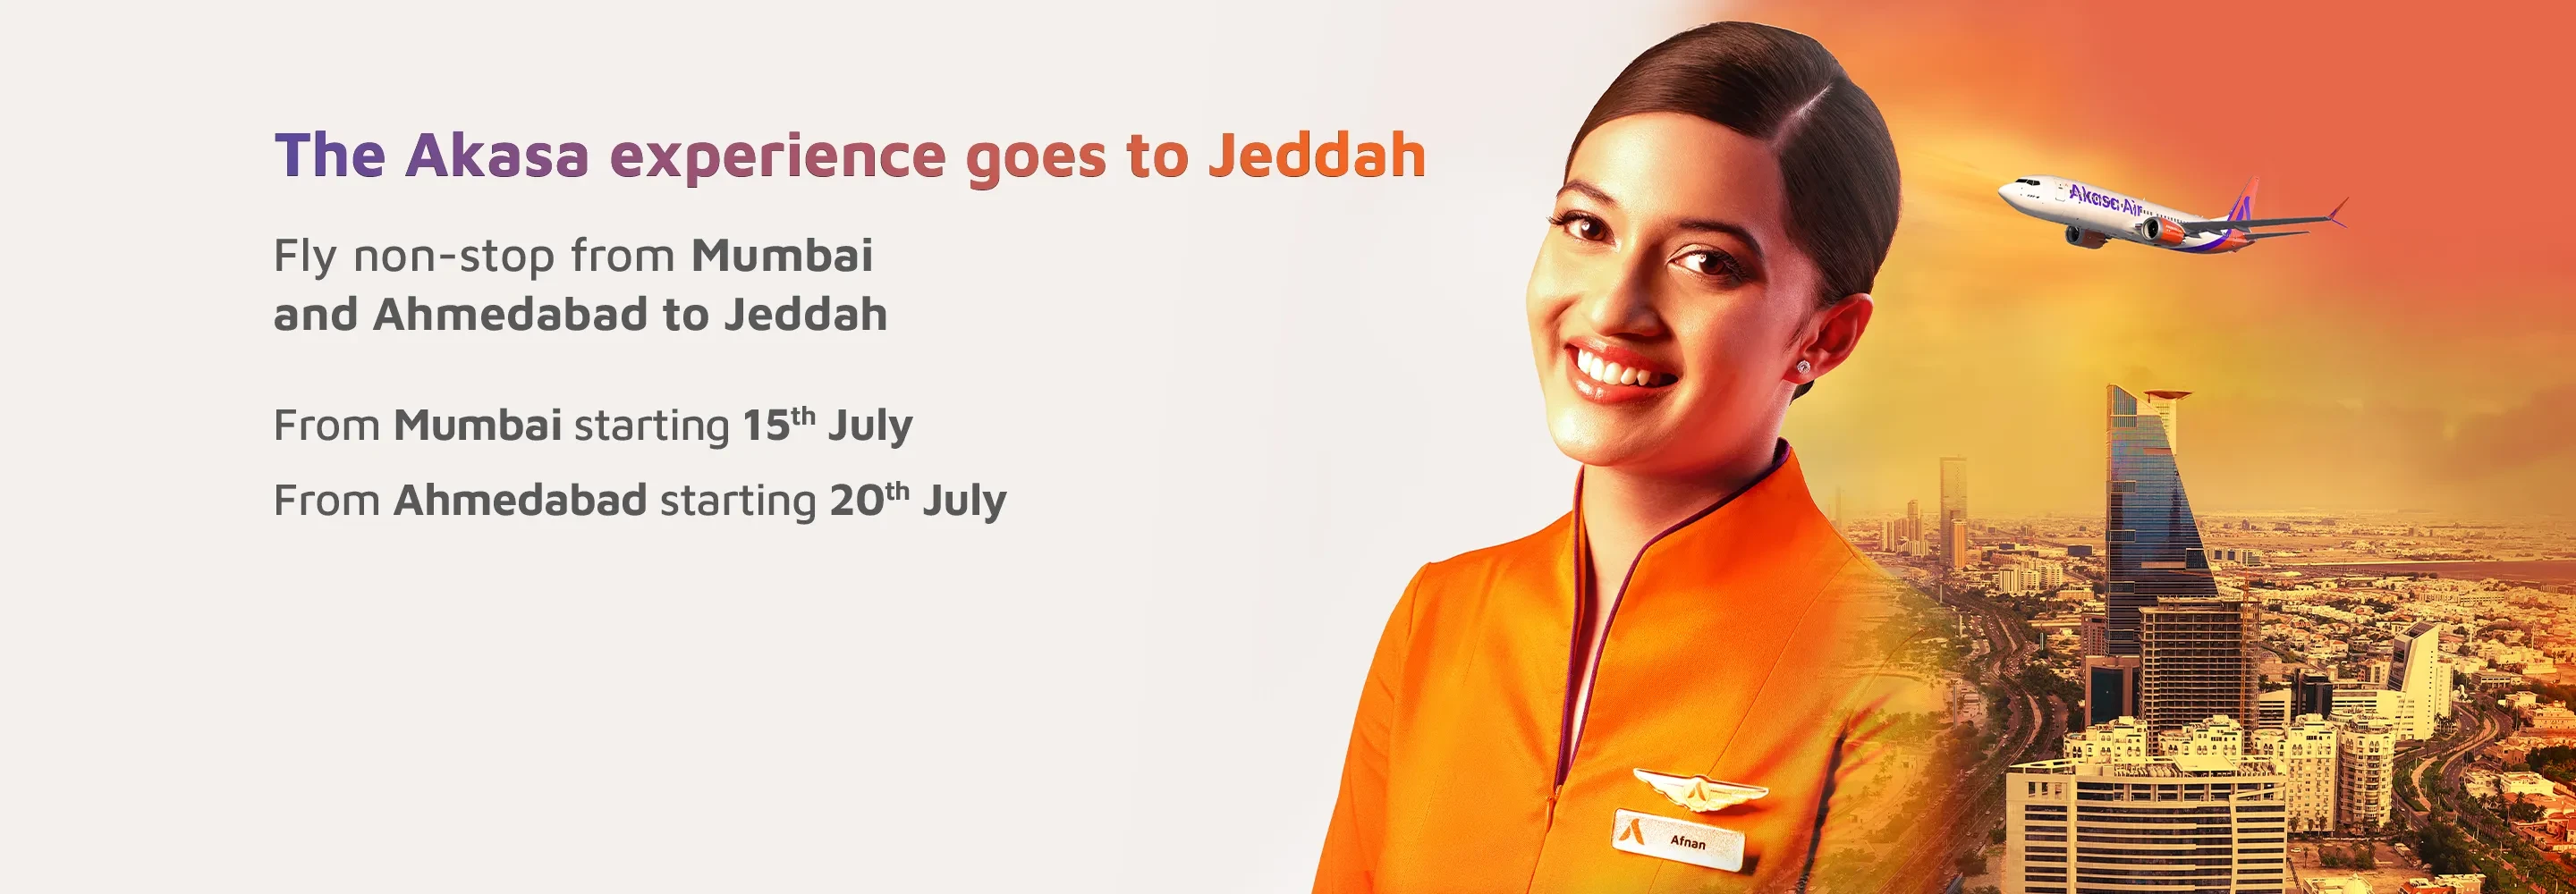 The Akasa experience goes to Jeddah. Fly non-stop from Mumbai and Ahmedabad to Jeddah. Starting 8 June 2024. Book now.